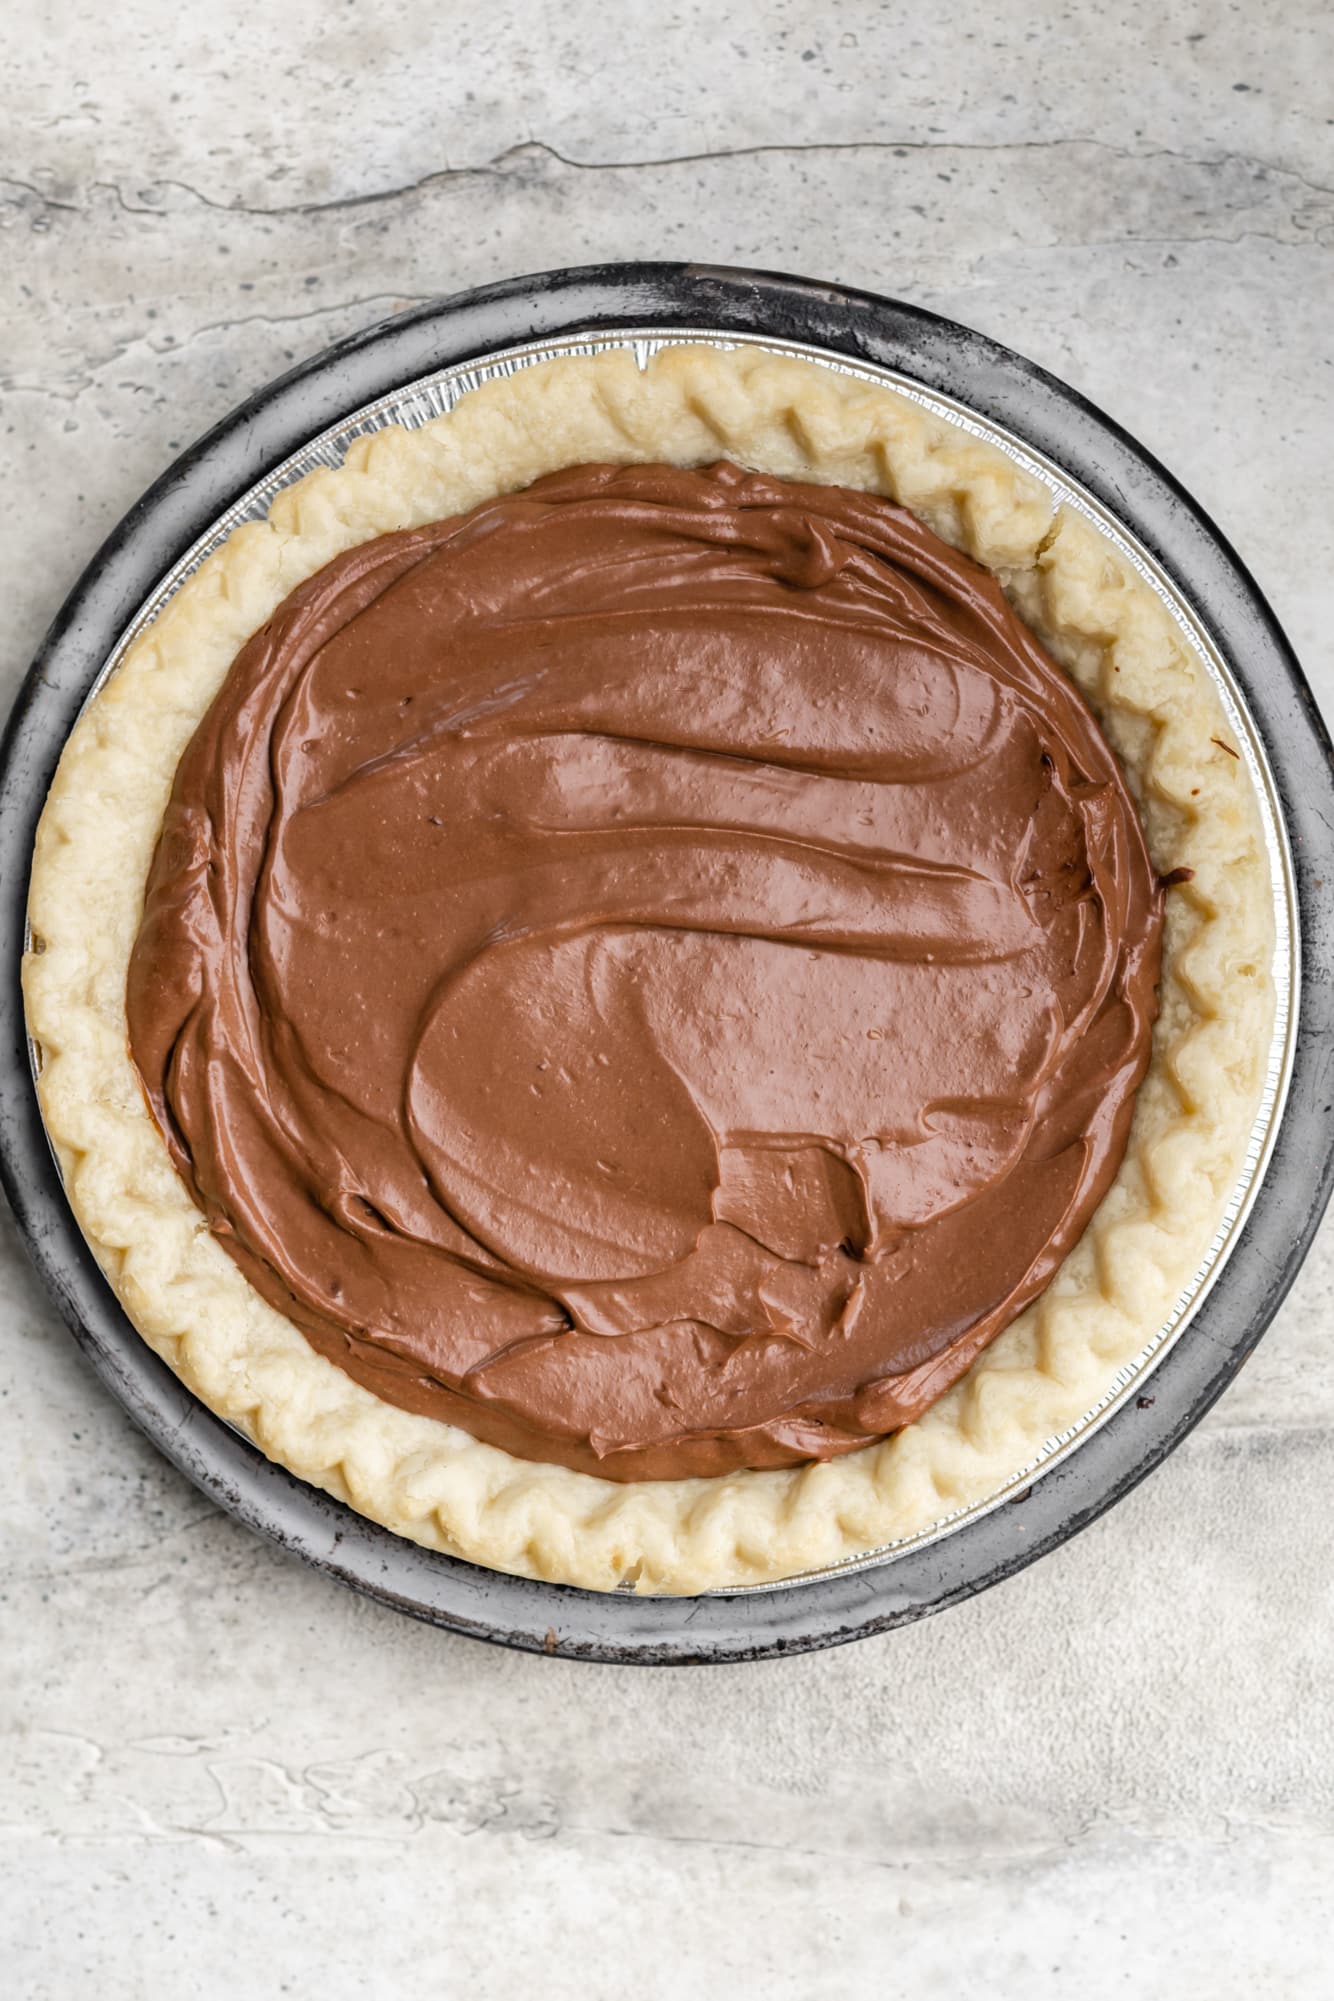 a smooth chocolate mixture in a baked pie shell.